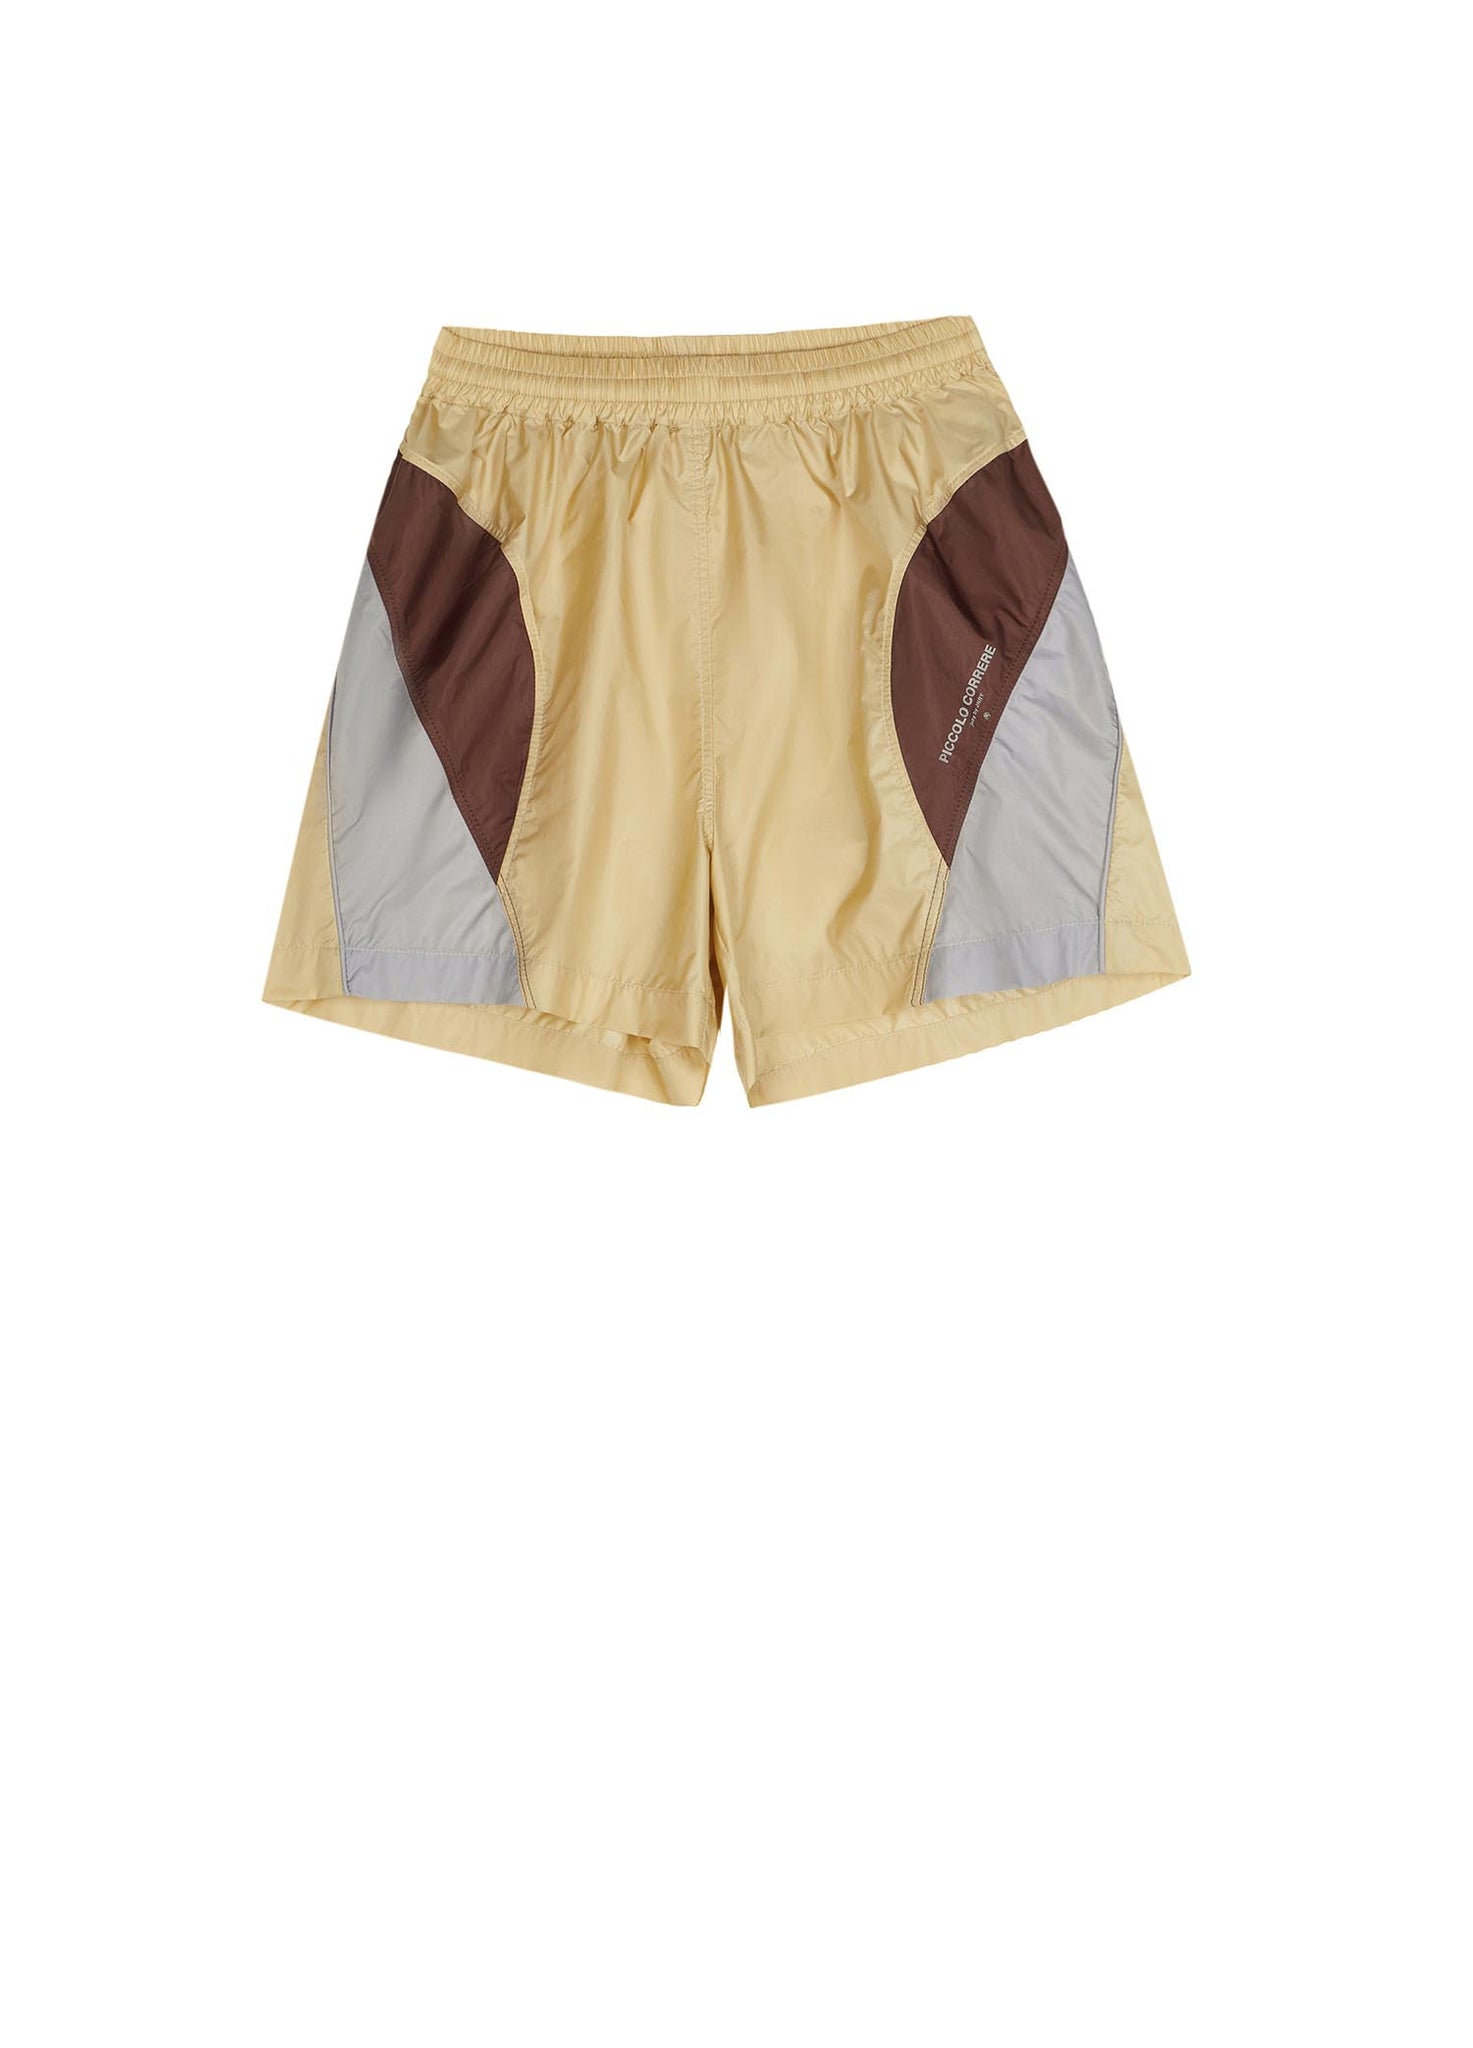 Shorts / jnby by JNBY Elasticated Waist Contrast Color Shorts